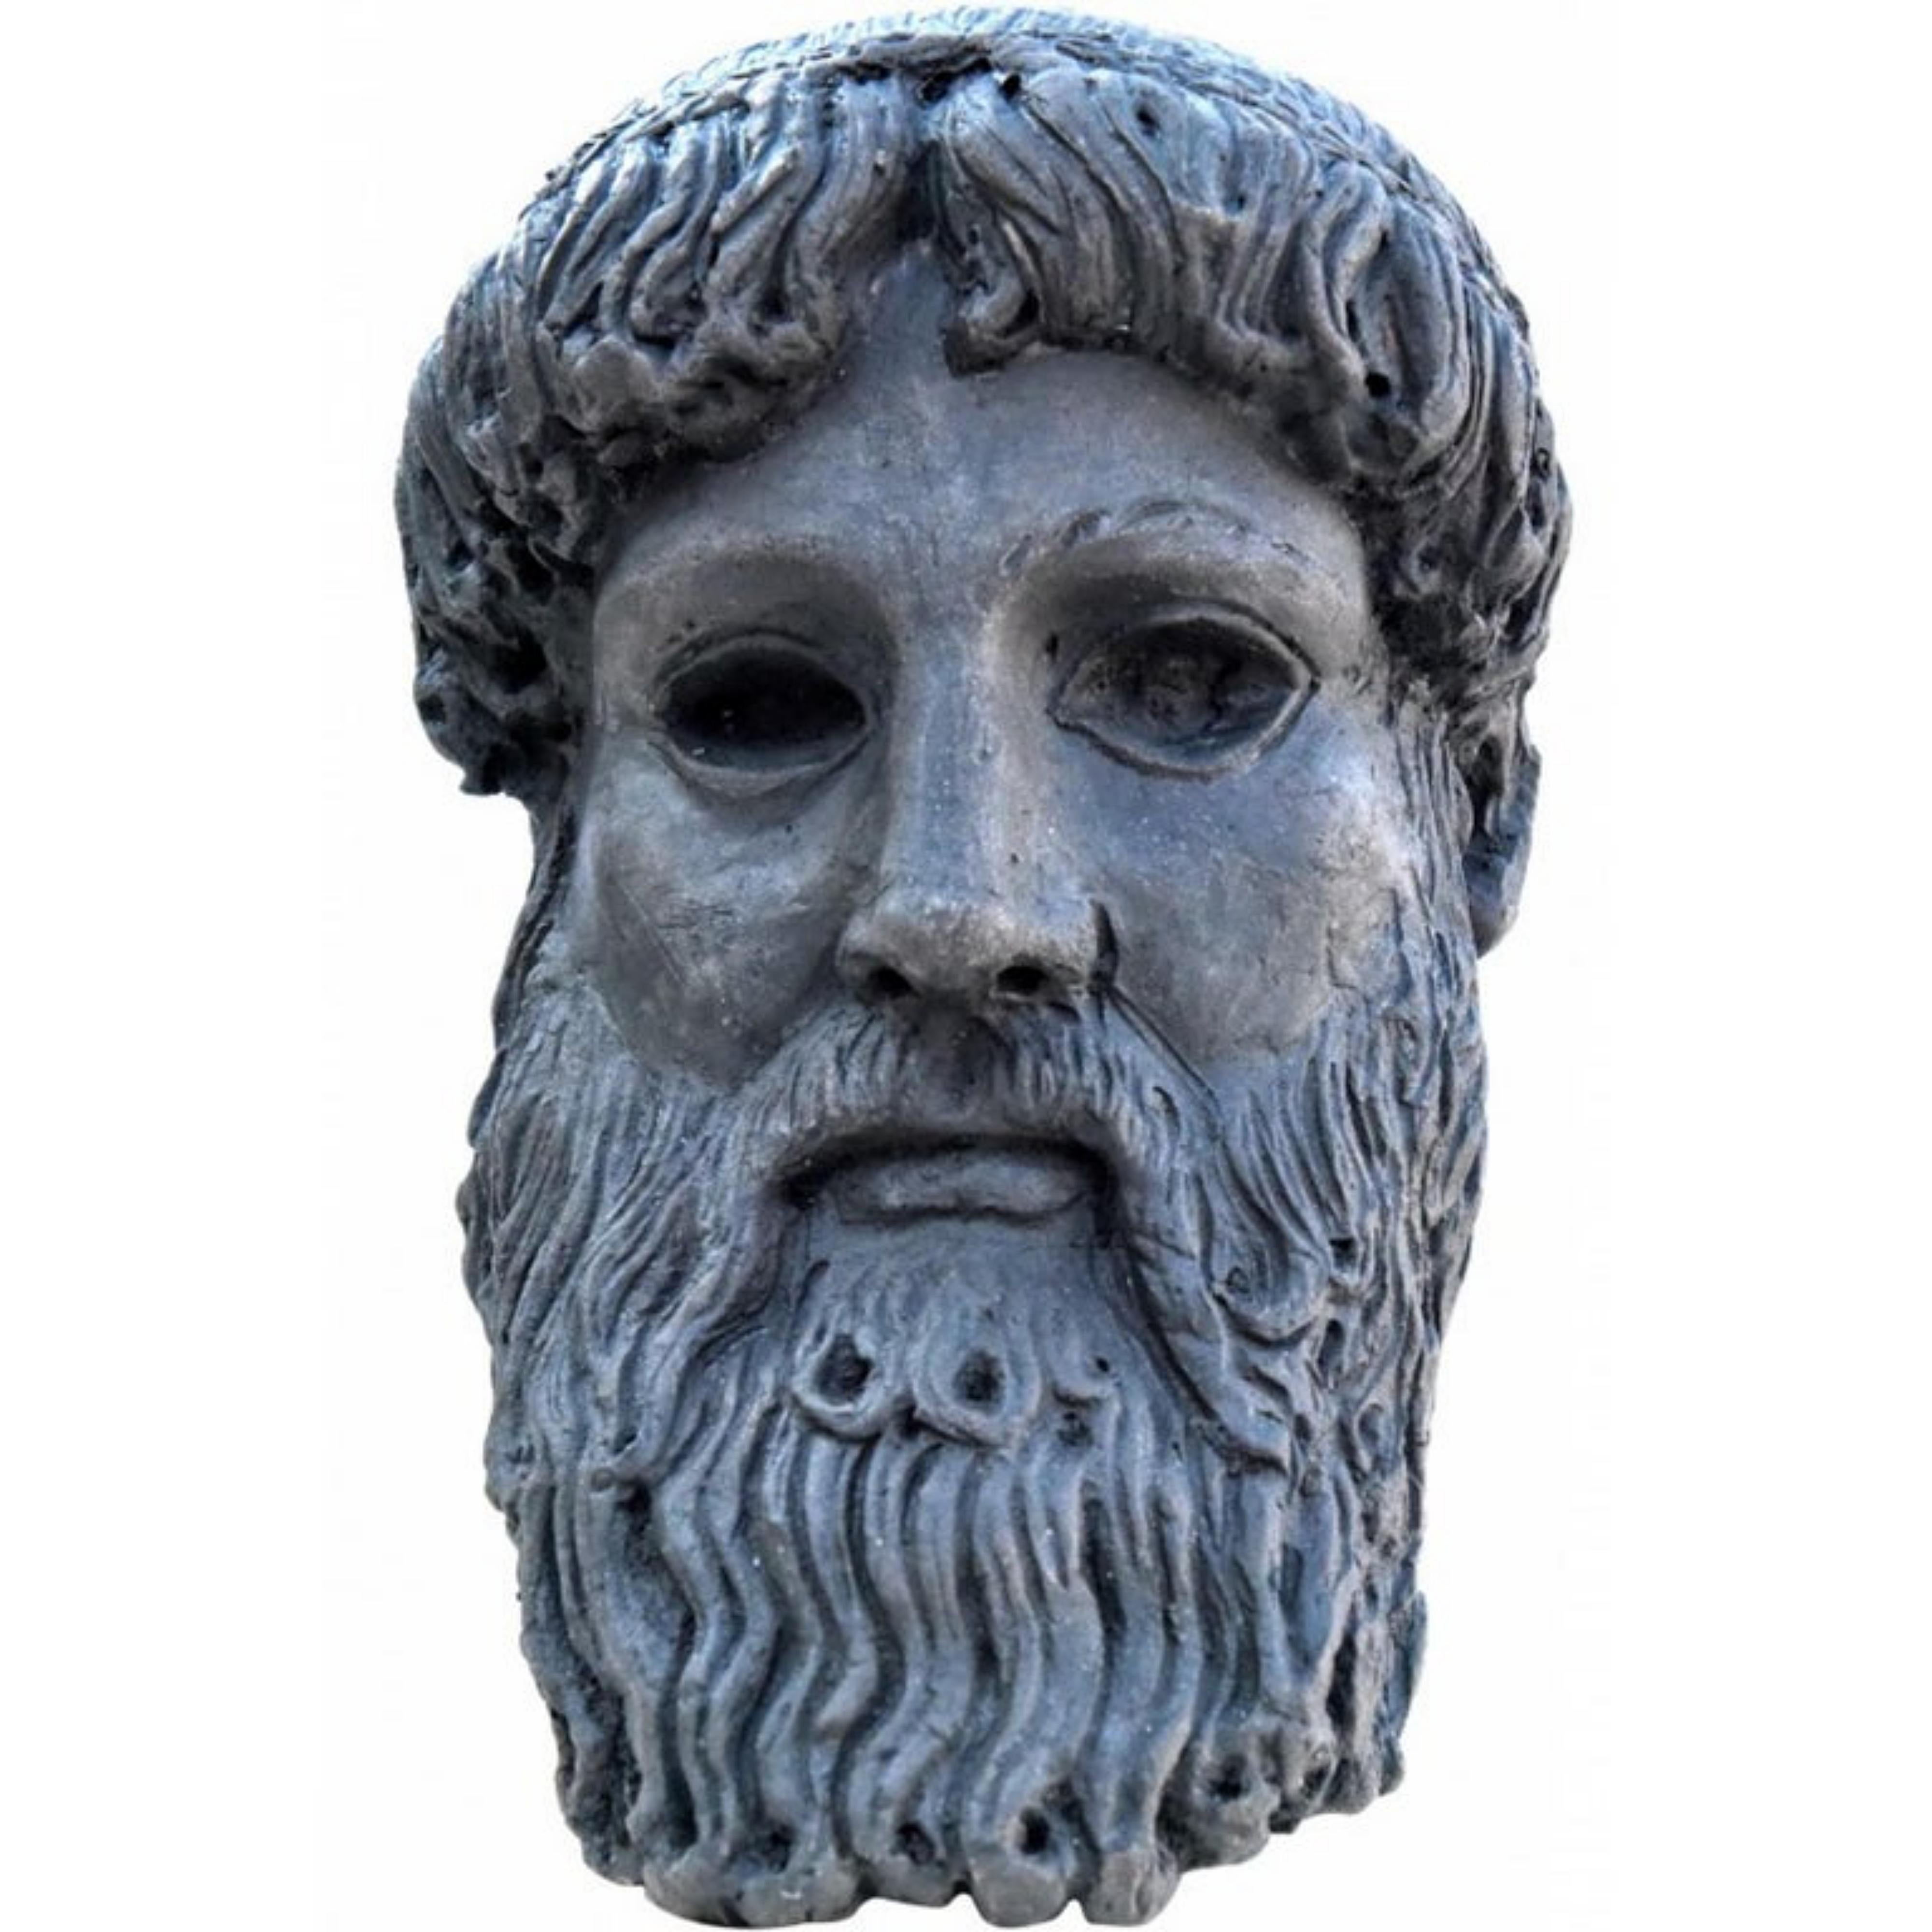 ZEUS OF CAPE ARTEMISION - TERRACOTTA HEAD - CHRONIS 20th century

HEIGHT 38cm
WIDTH 28cms
LENGTH 34cms
WEIGHT 8Kg
Material Patinated terracotta
marble base including 

good conditions.